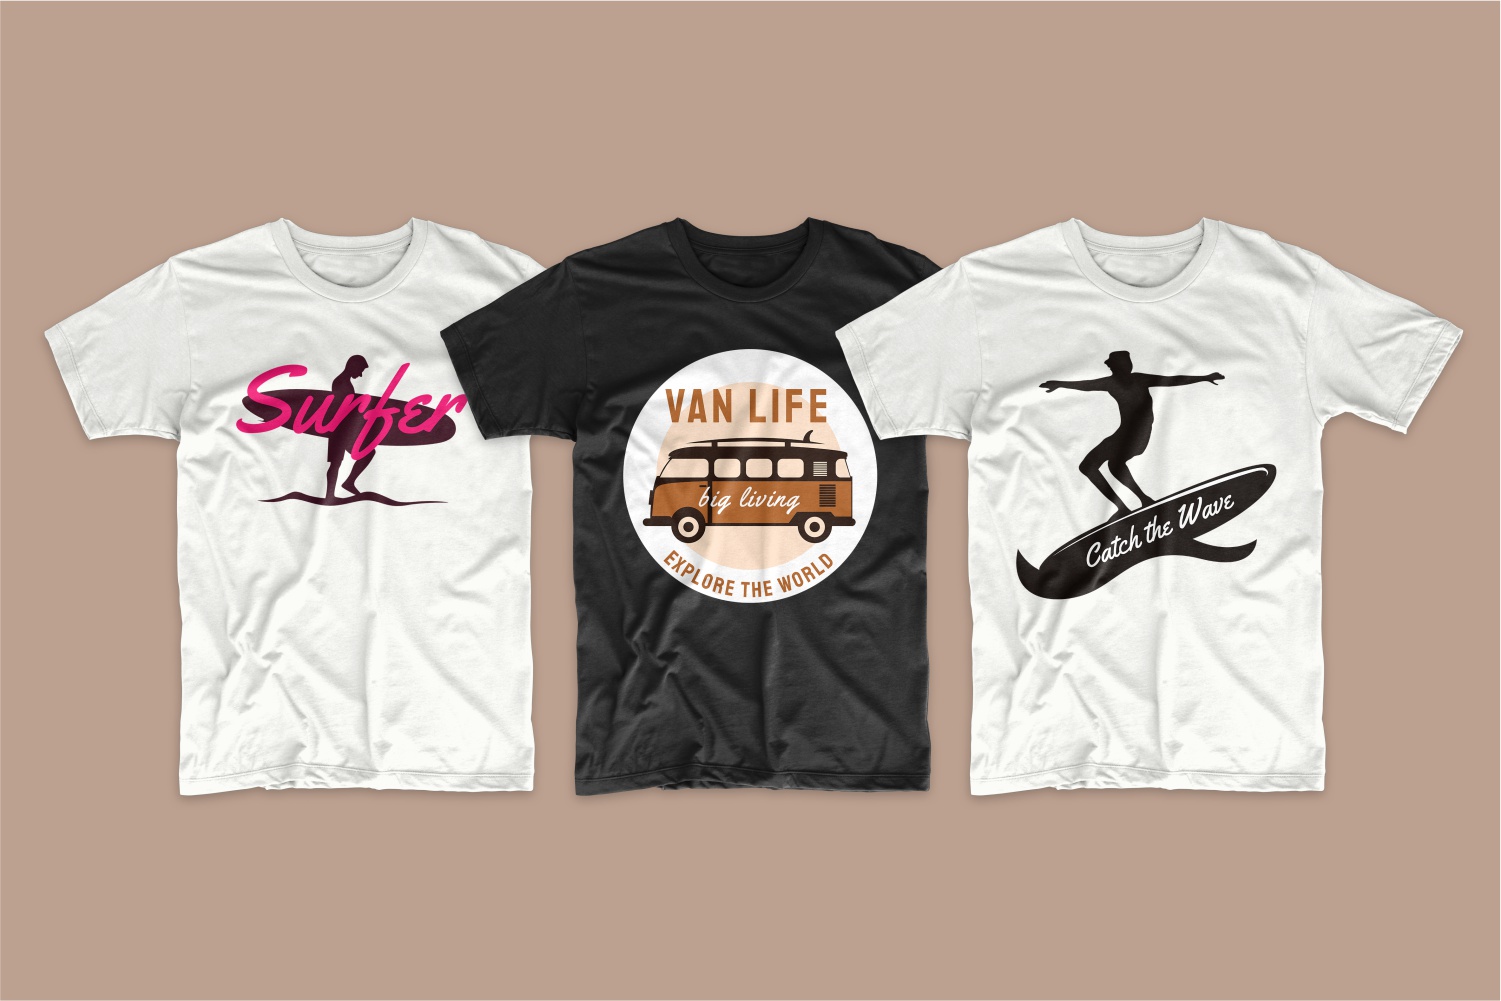 Stylish T-shirts with fresh designs. Depicted are surfers and a brown hippie van.